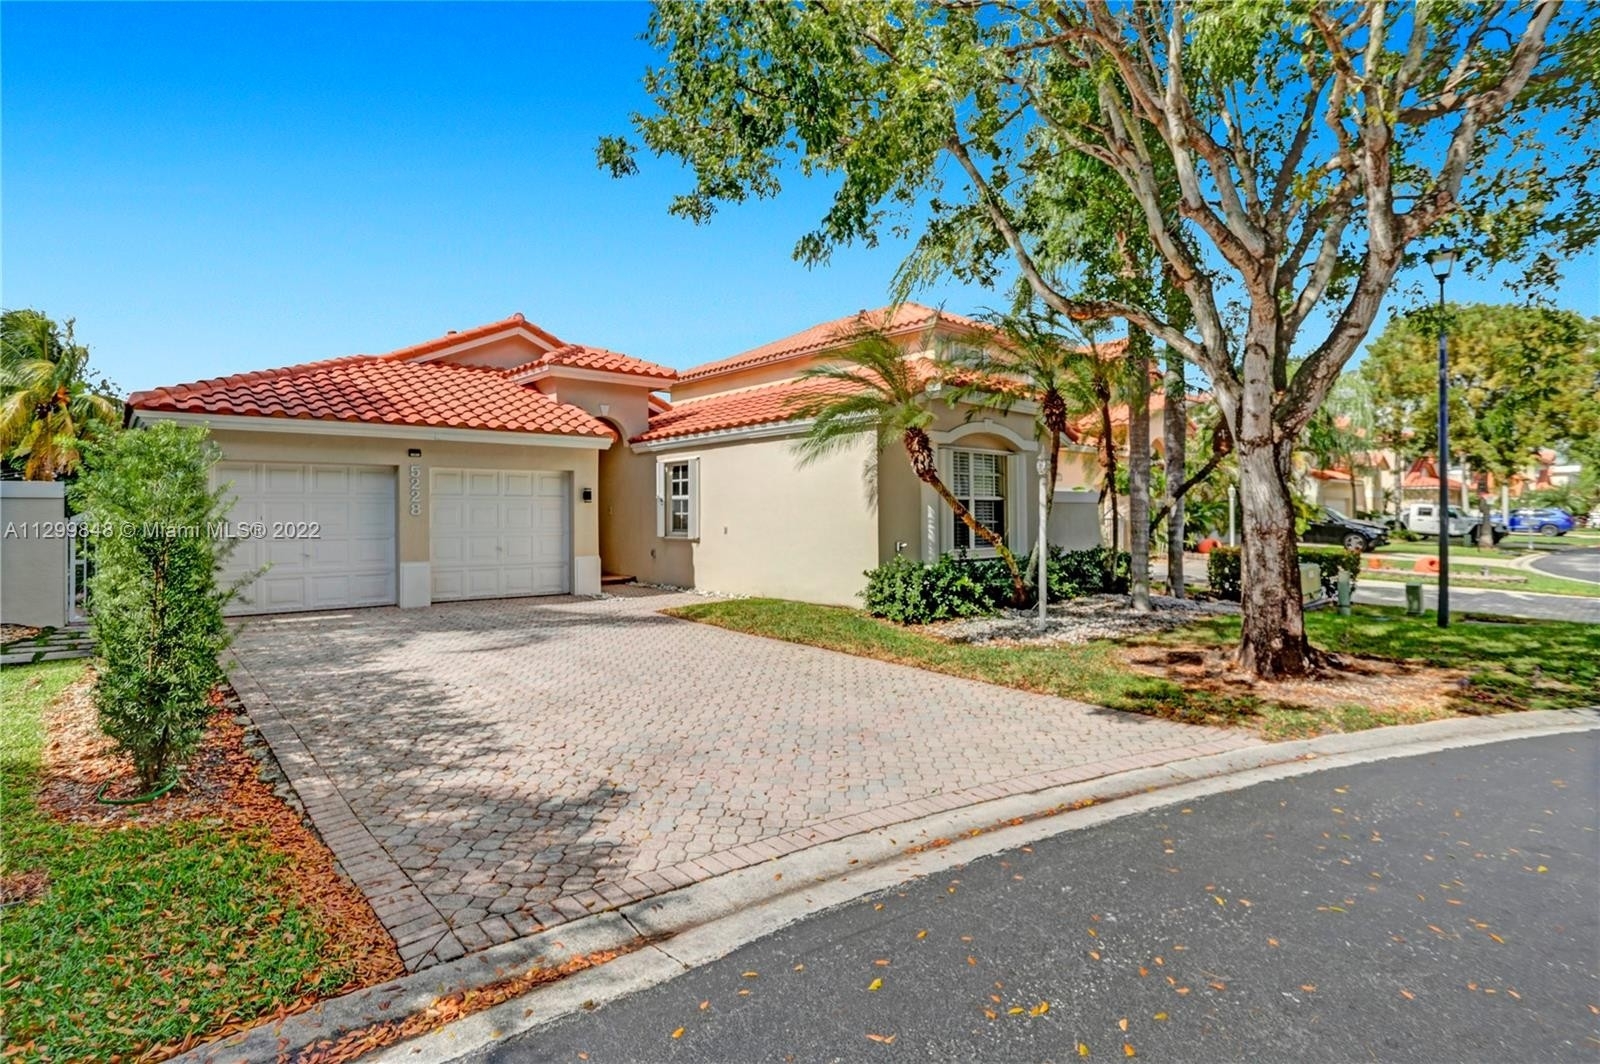 Single Family Home at 5228 NW 106th CT , 5228 Doral Park, Doral, FL 33178